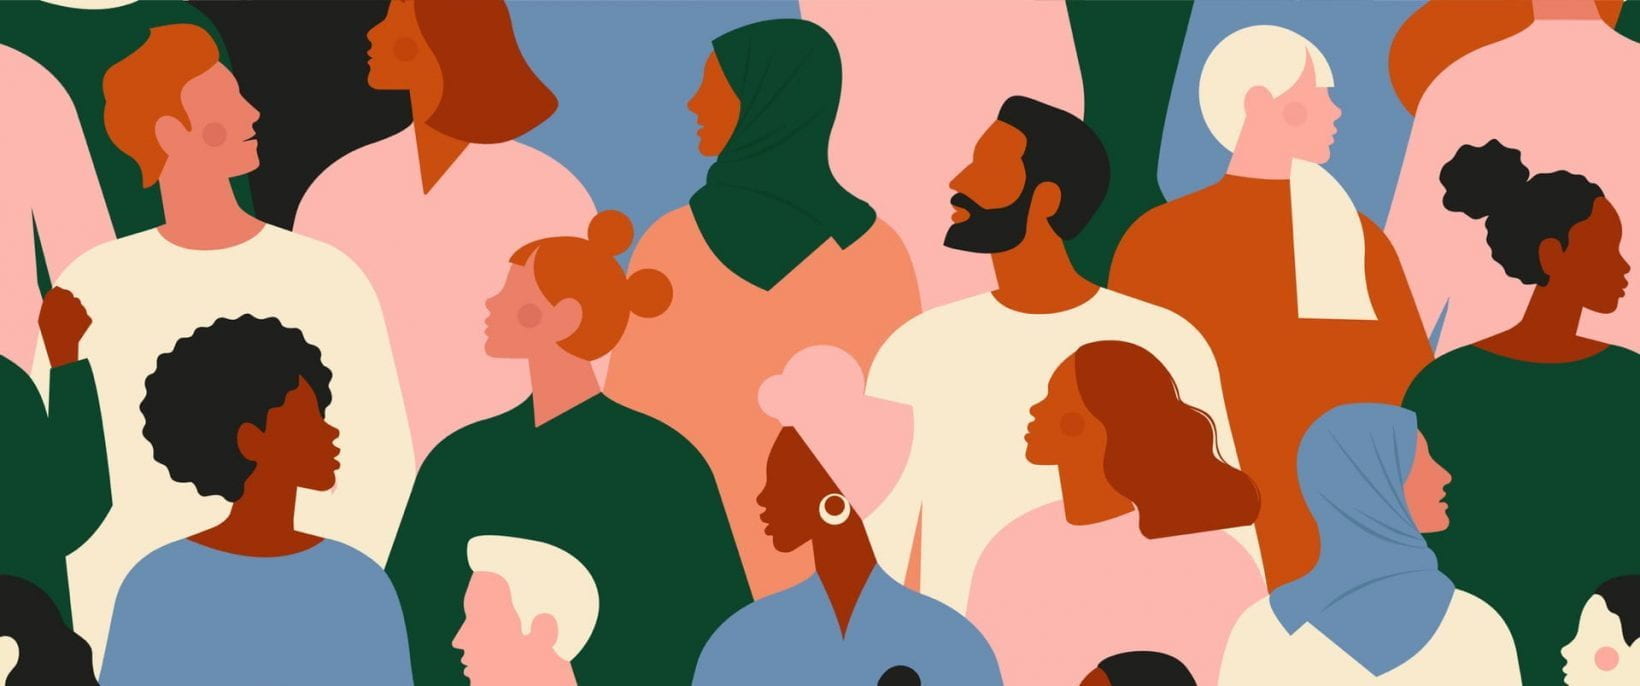 The project’s first Massive Open Online Course (MOOC) launches June 15, 2021 via edX, and will engage participants in deep reflection and discussion around topics of equity and inclusion across a variety of institutional contexts. 